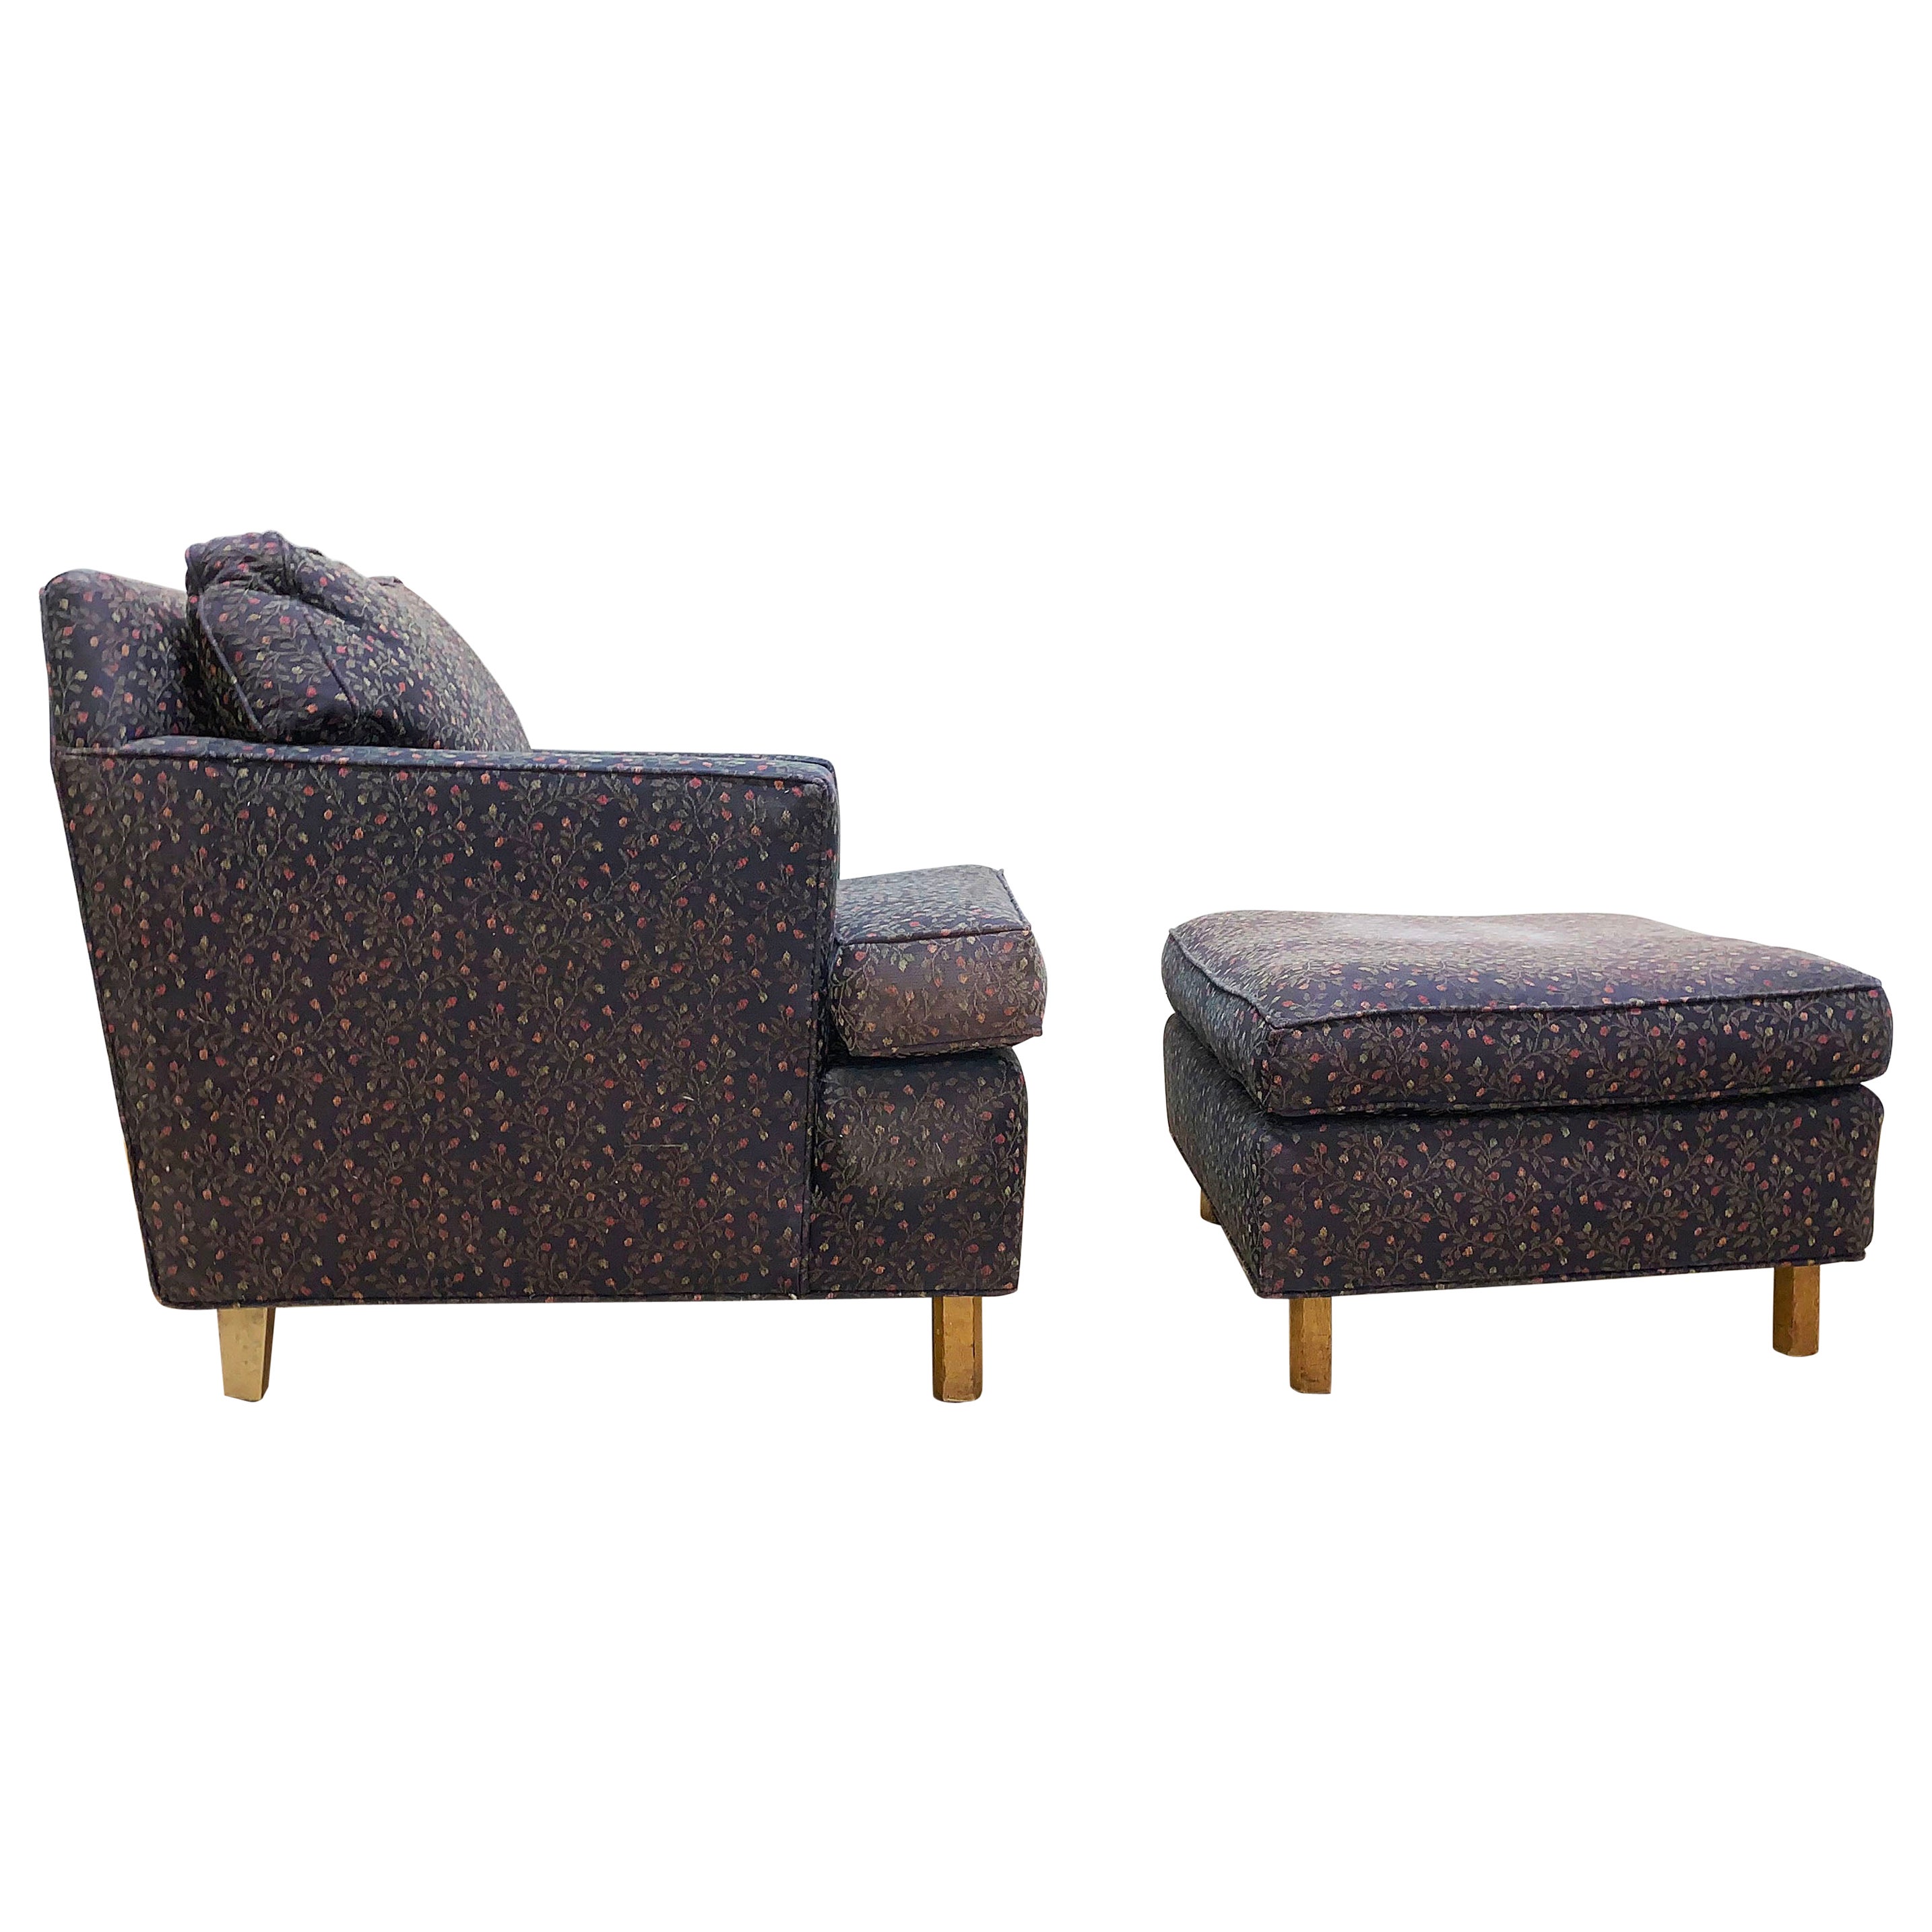 Edward Wormley Faceted Lounge Chair with Ottoman for Dunbar